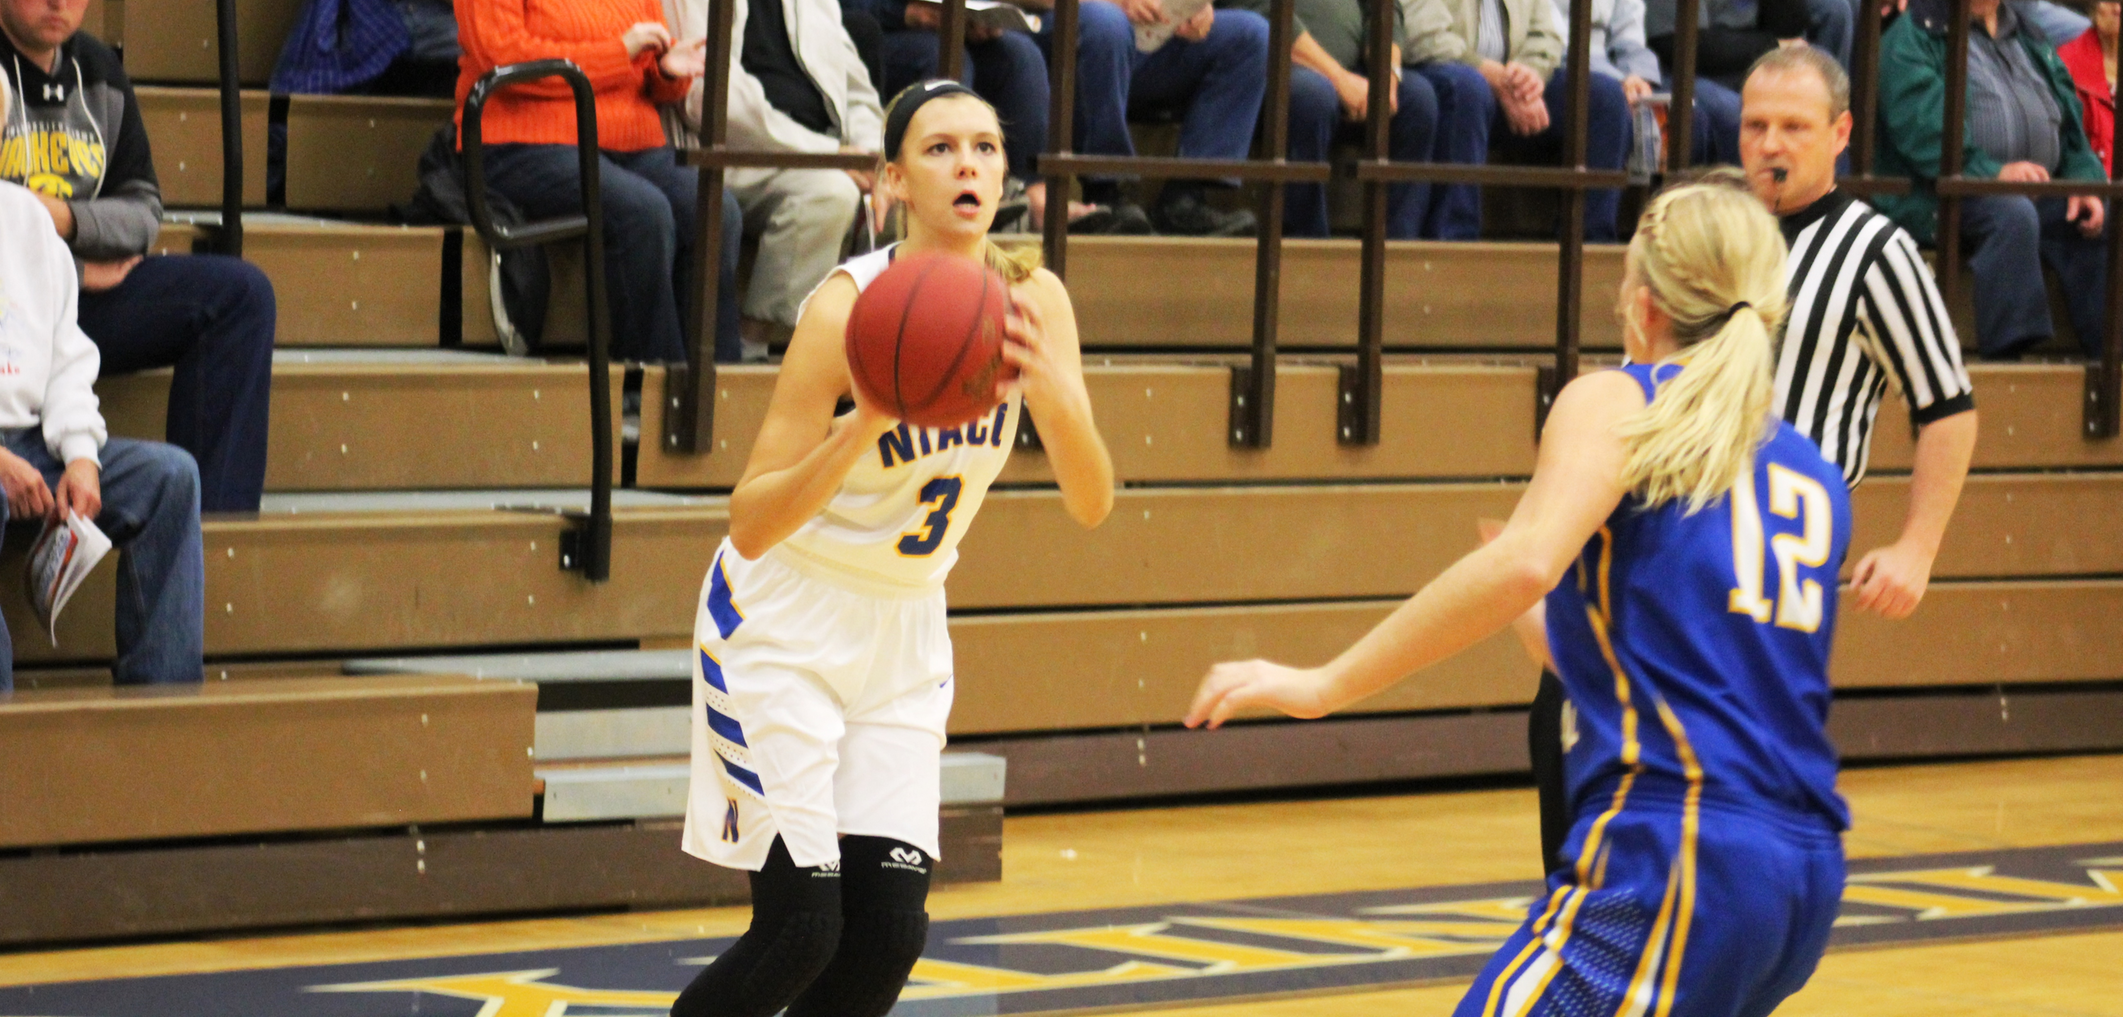 ICCAC women's basketball leaders